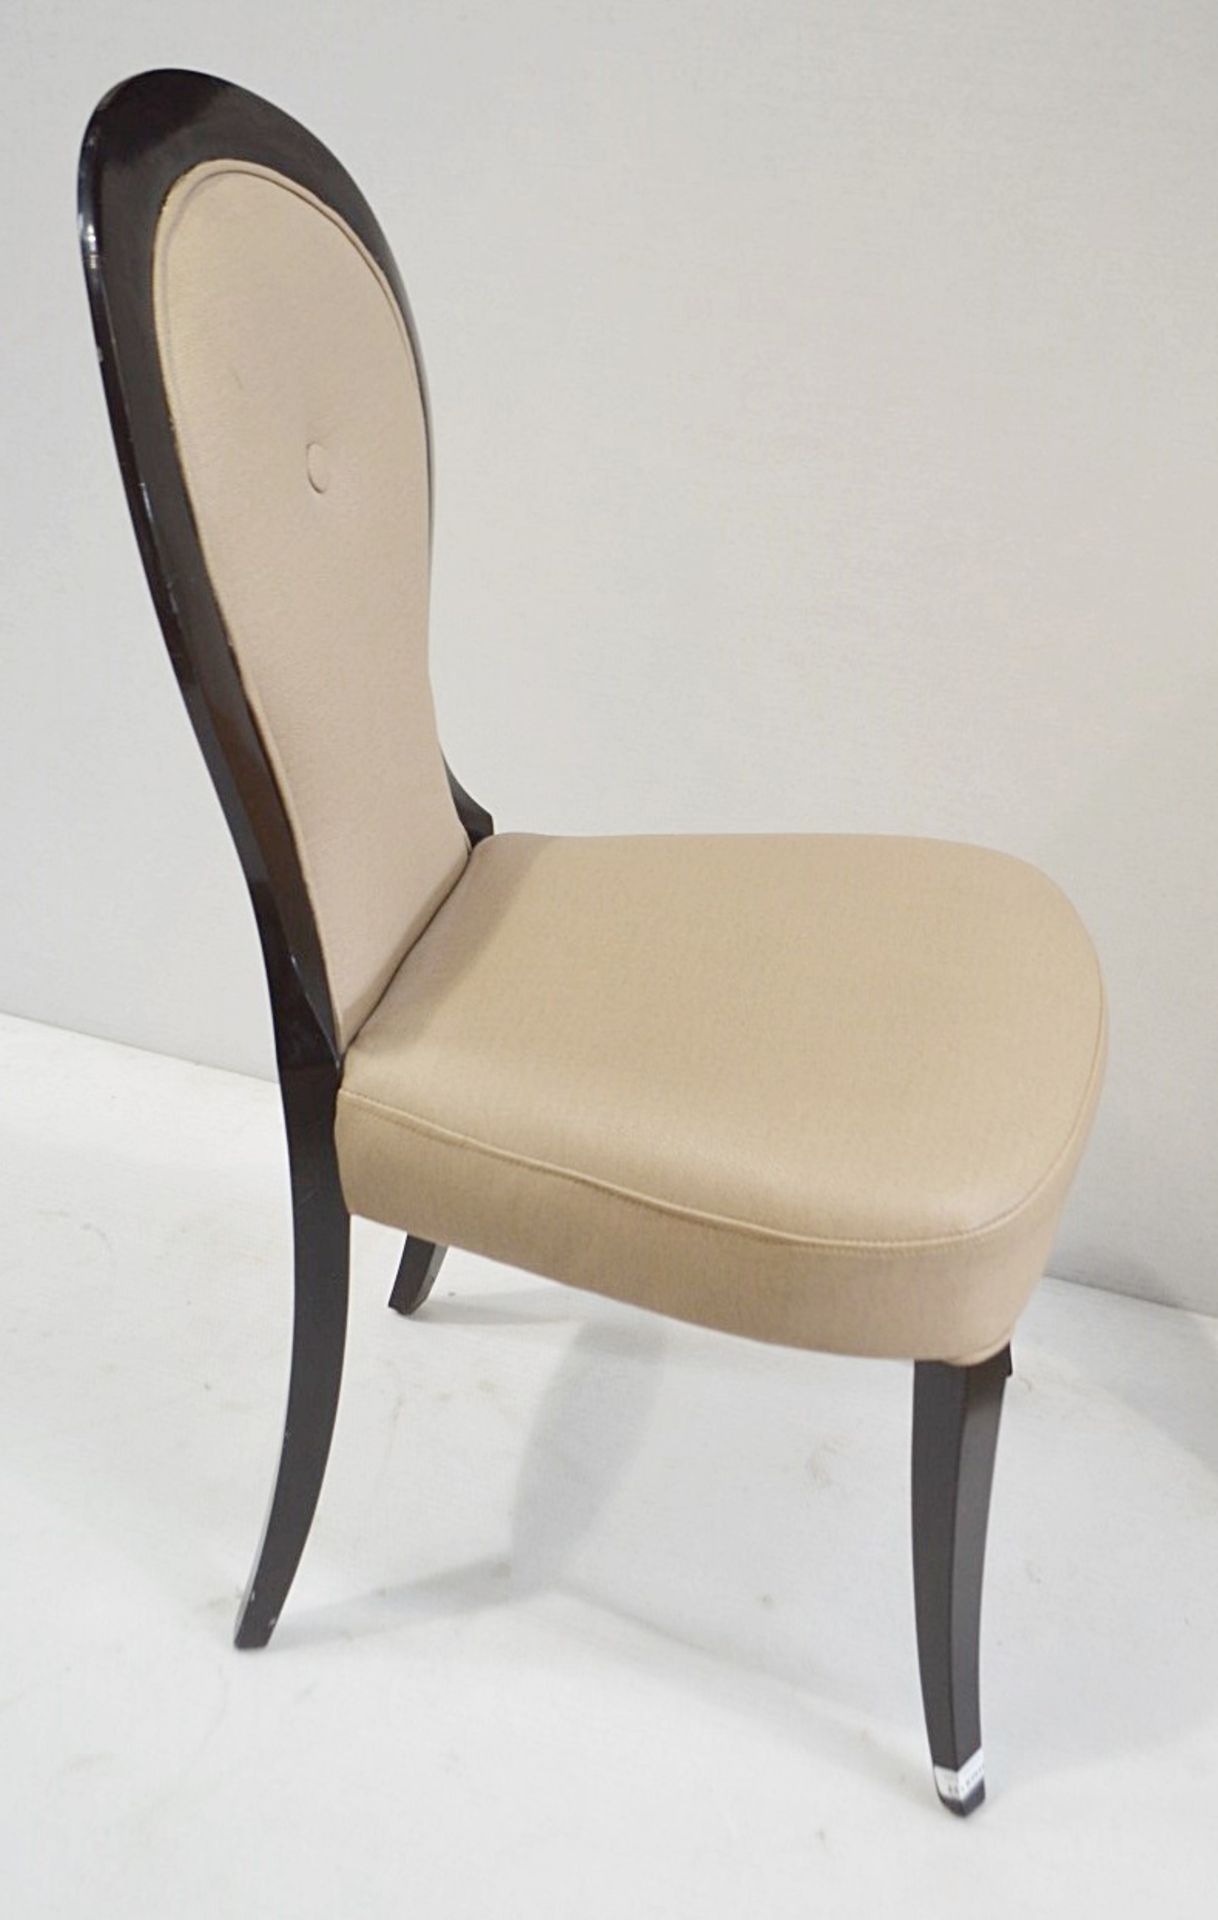 1 x Cushion Backed Chair With Curved Legs - Dimensions: H100 x W49 x D50cm / Seat 48cm - Ref: HMS127 - Image 4 of 4